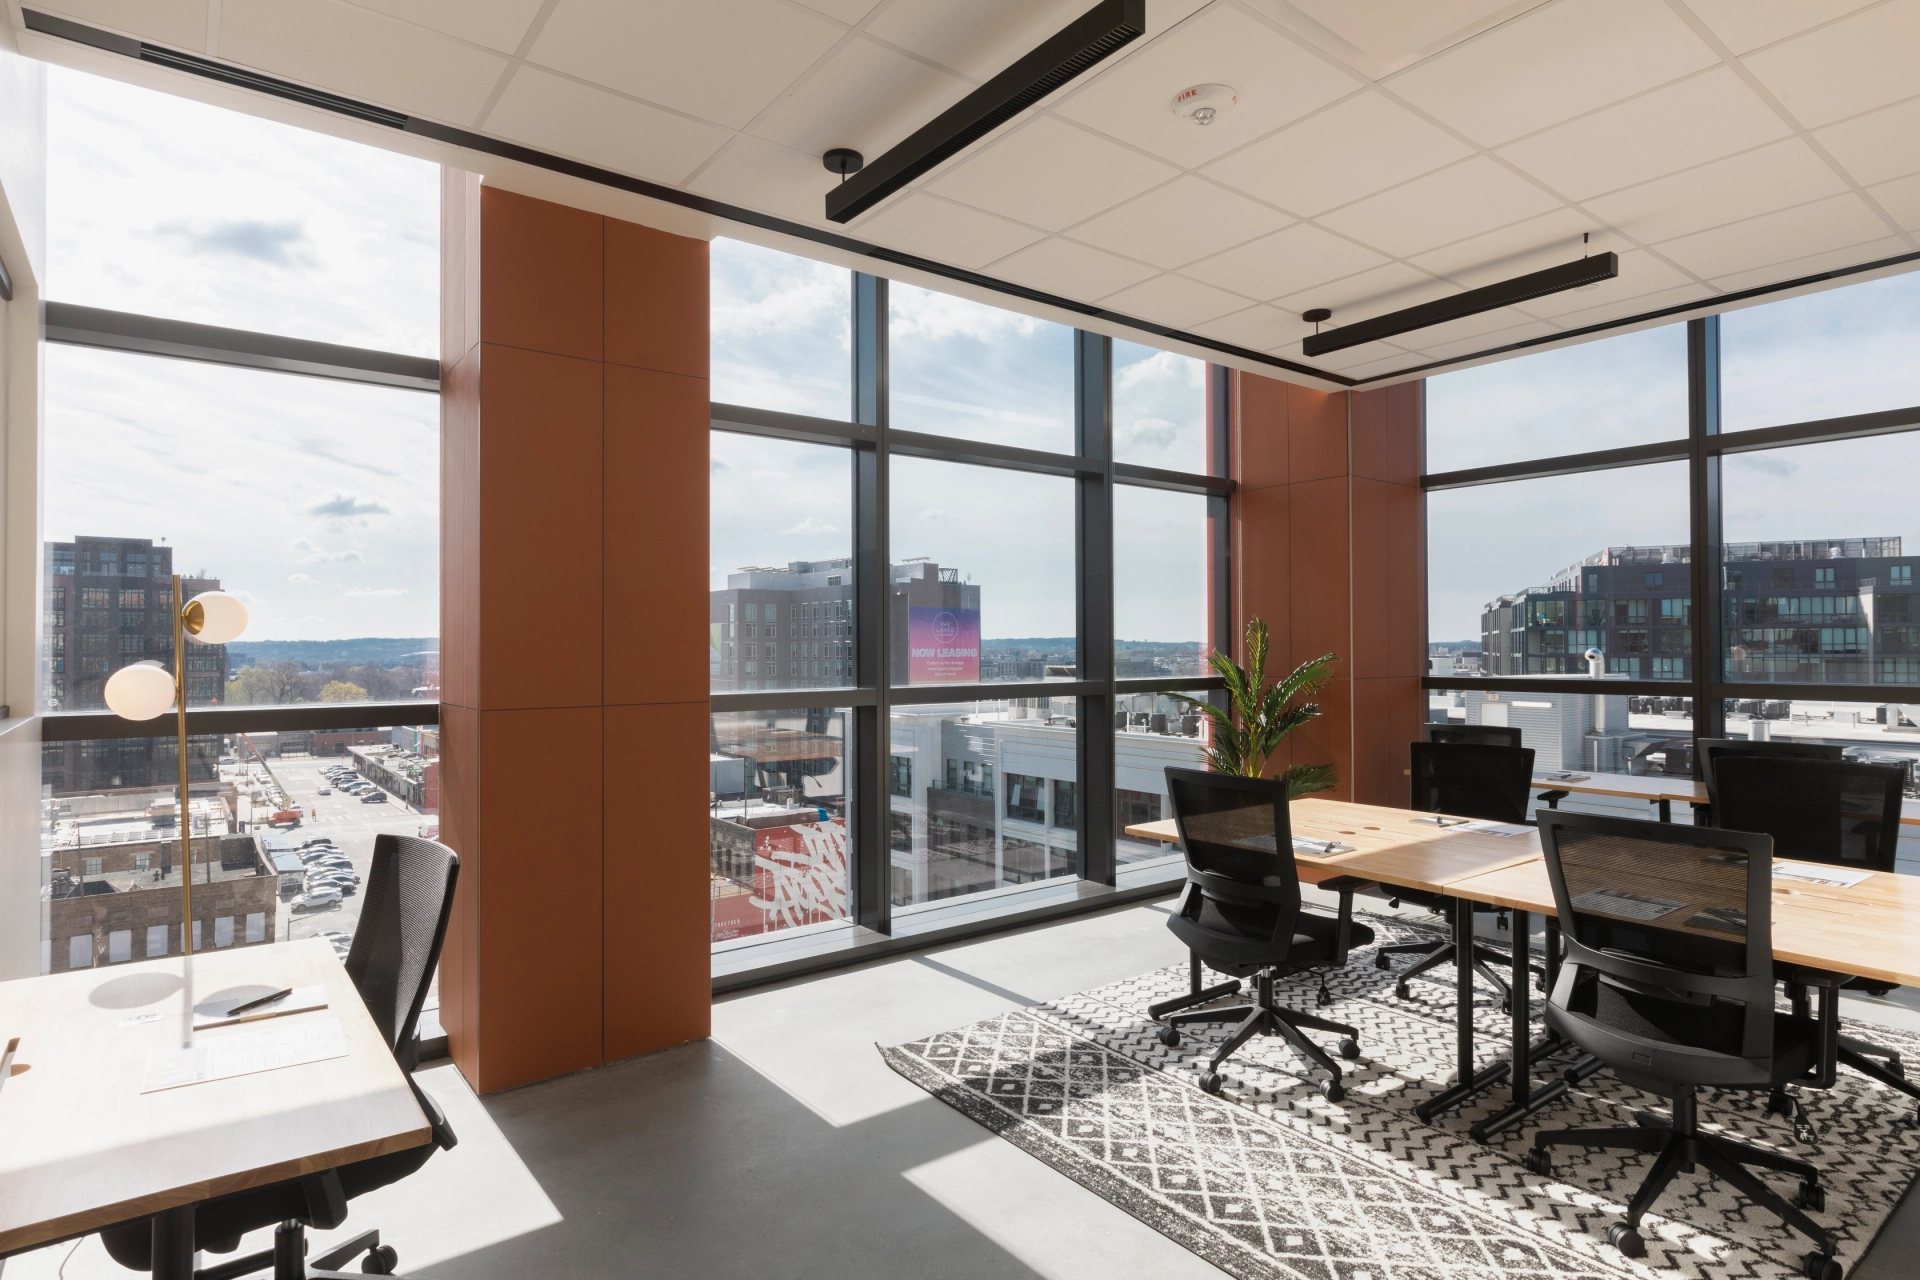 A Washington coworking office with large windows overlooking a city.